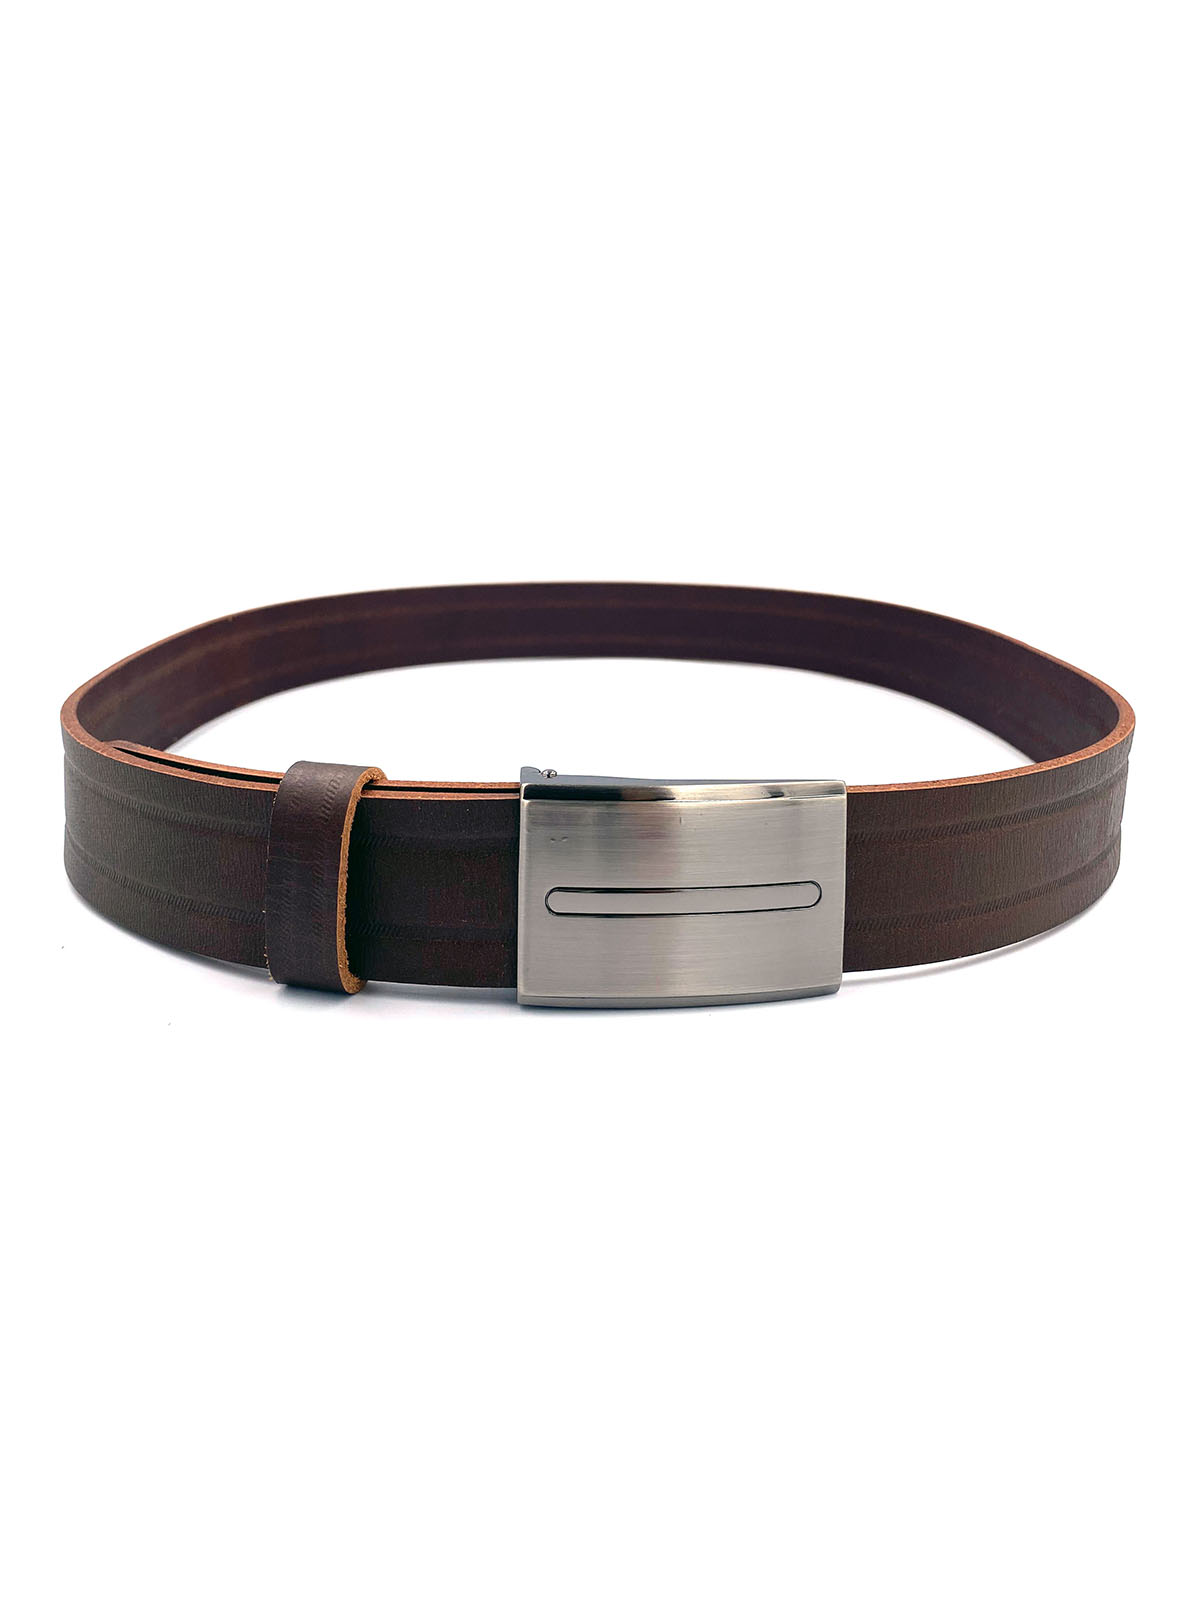 Belt in brown with metal plate - 10420 - € 21.37 img2